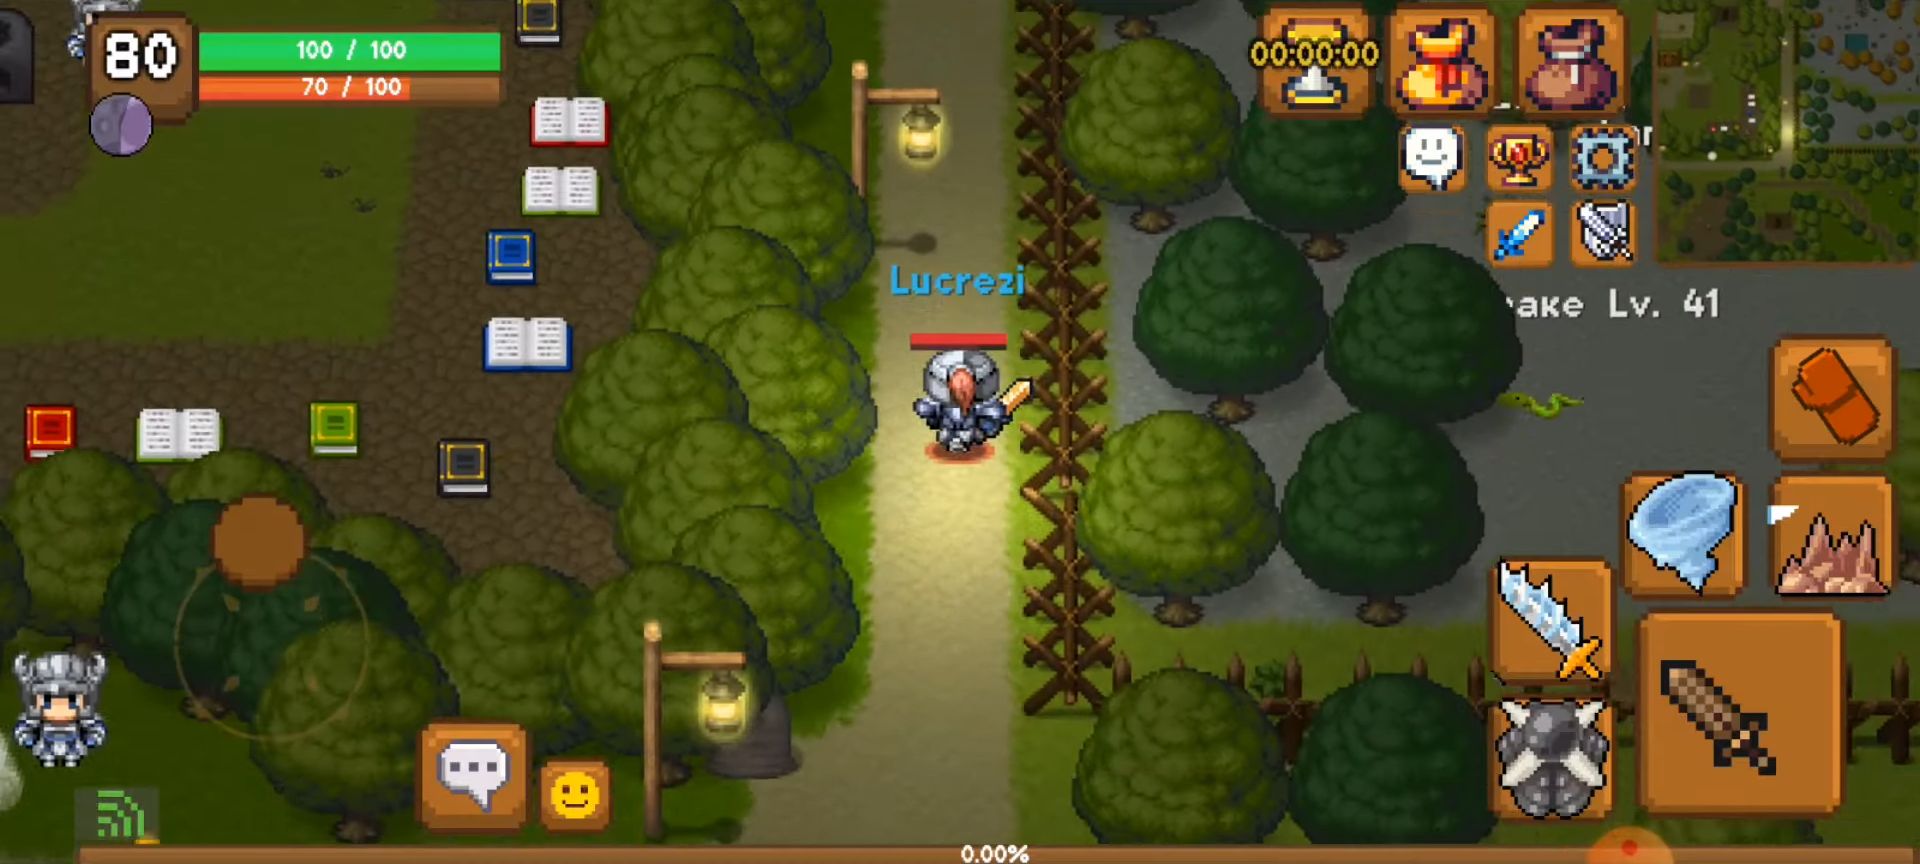 Gameplay of the Sword of Legacy Online MMORPG for Android phone or tablet.